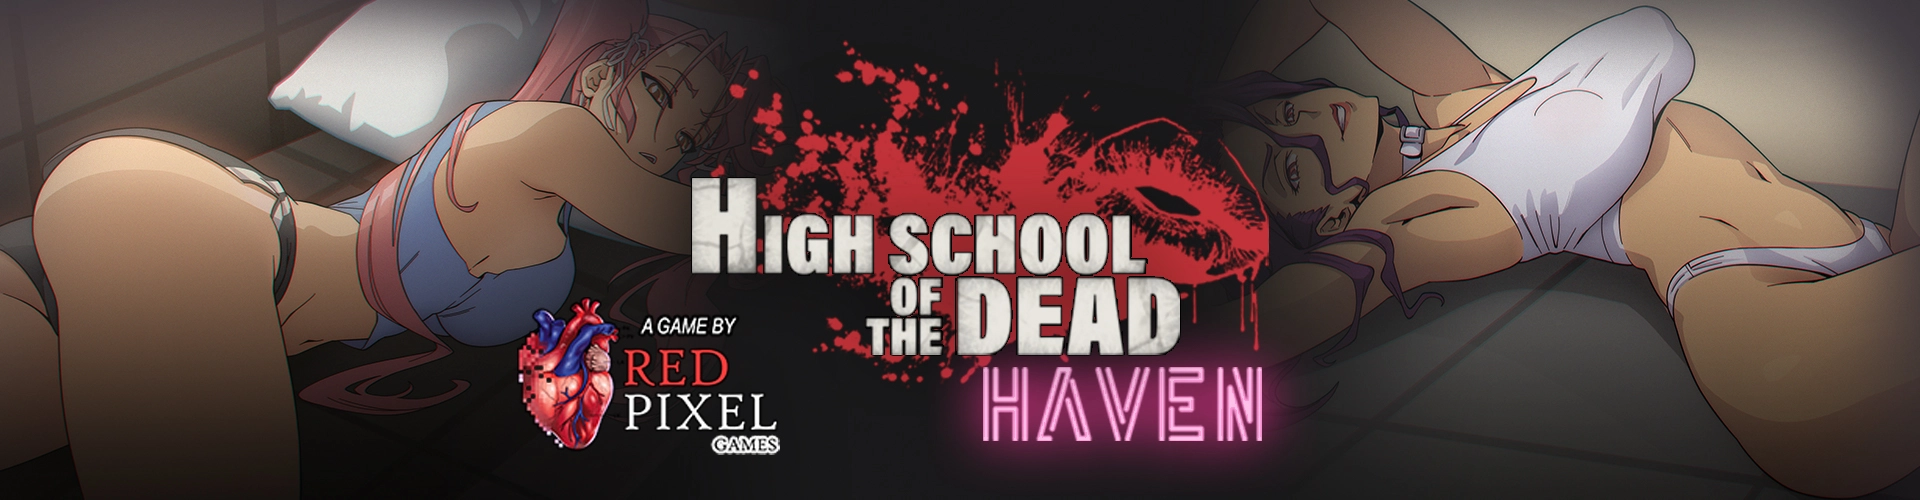 Highschool of the Dead: Haven main image